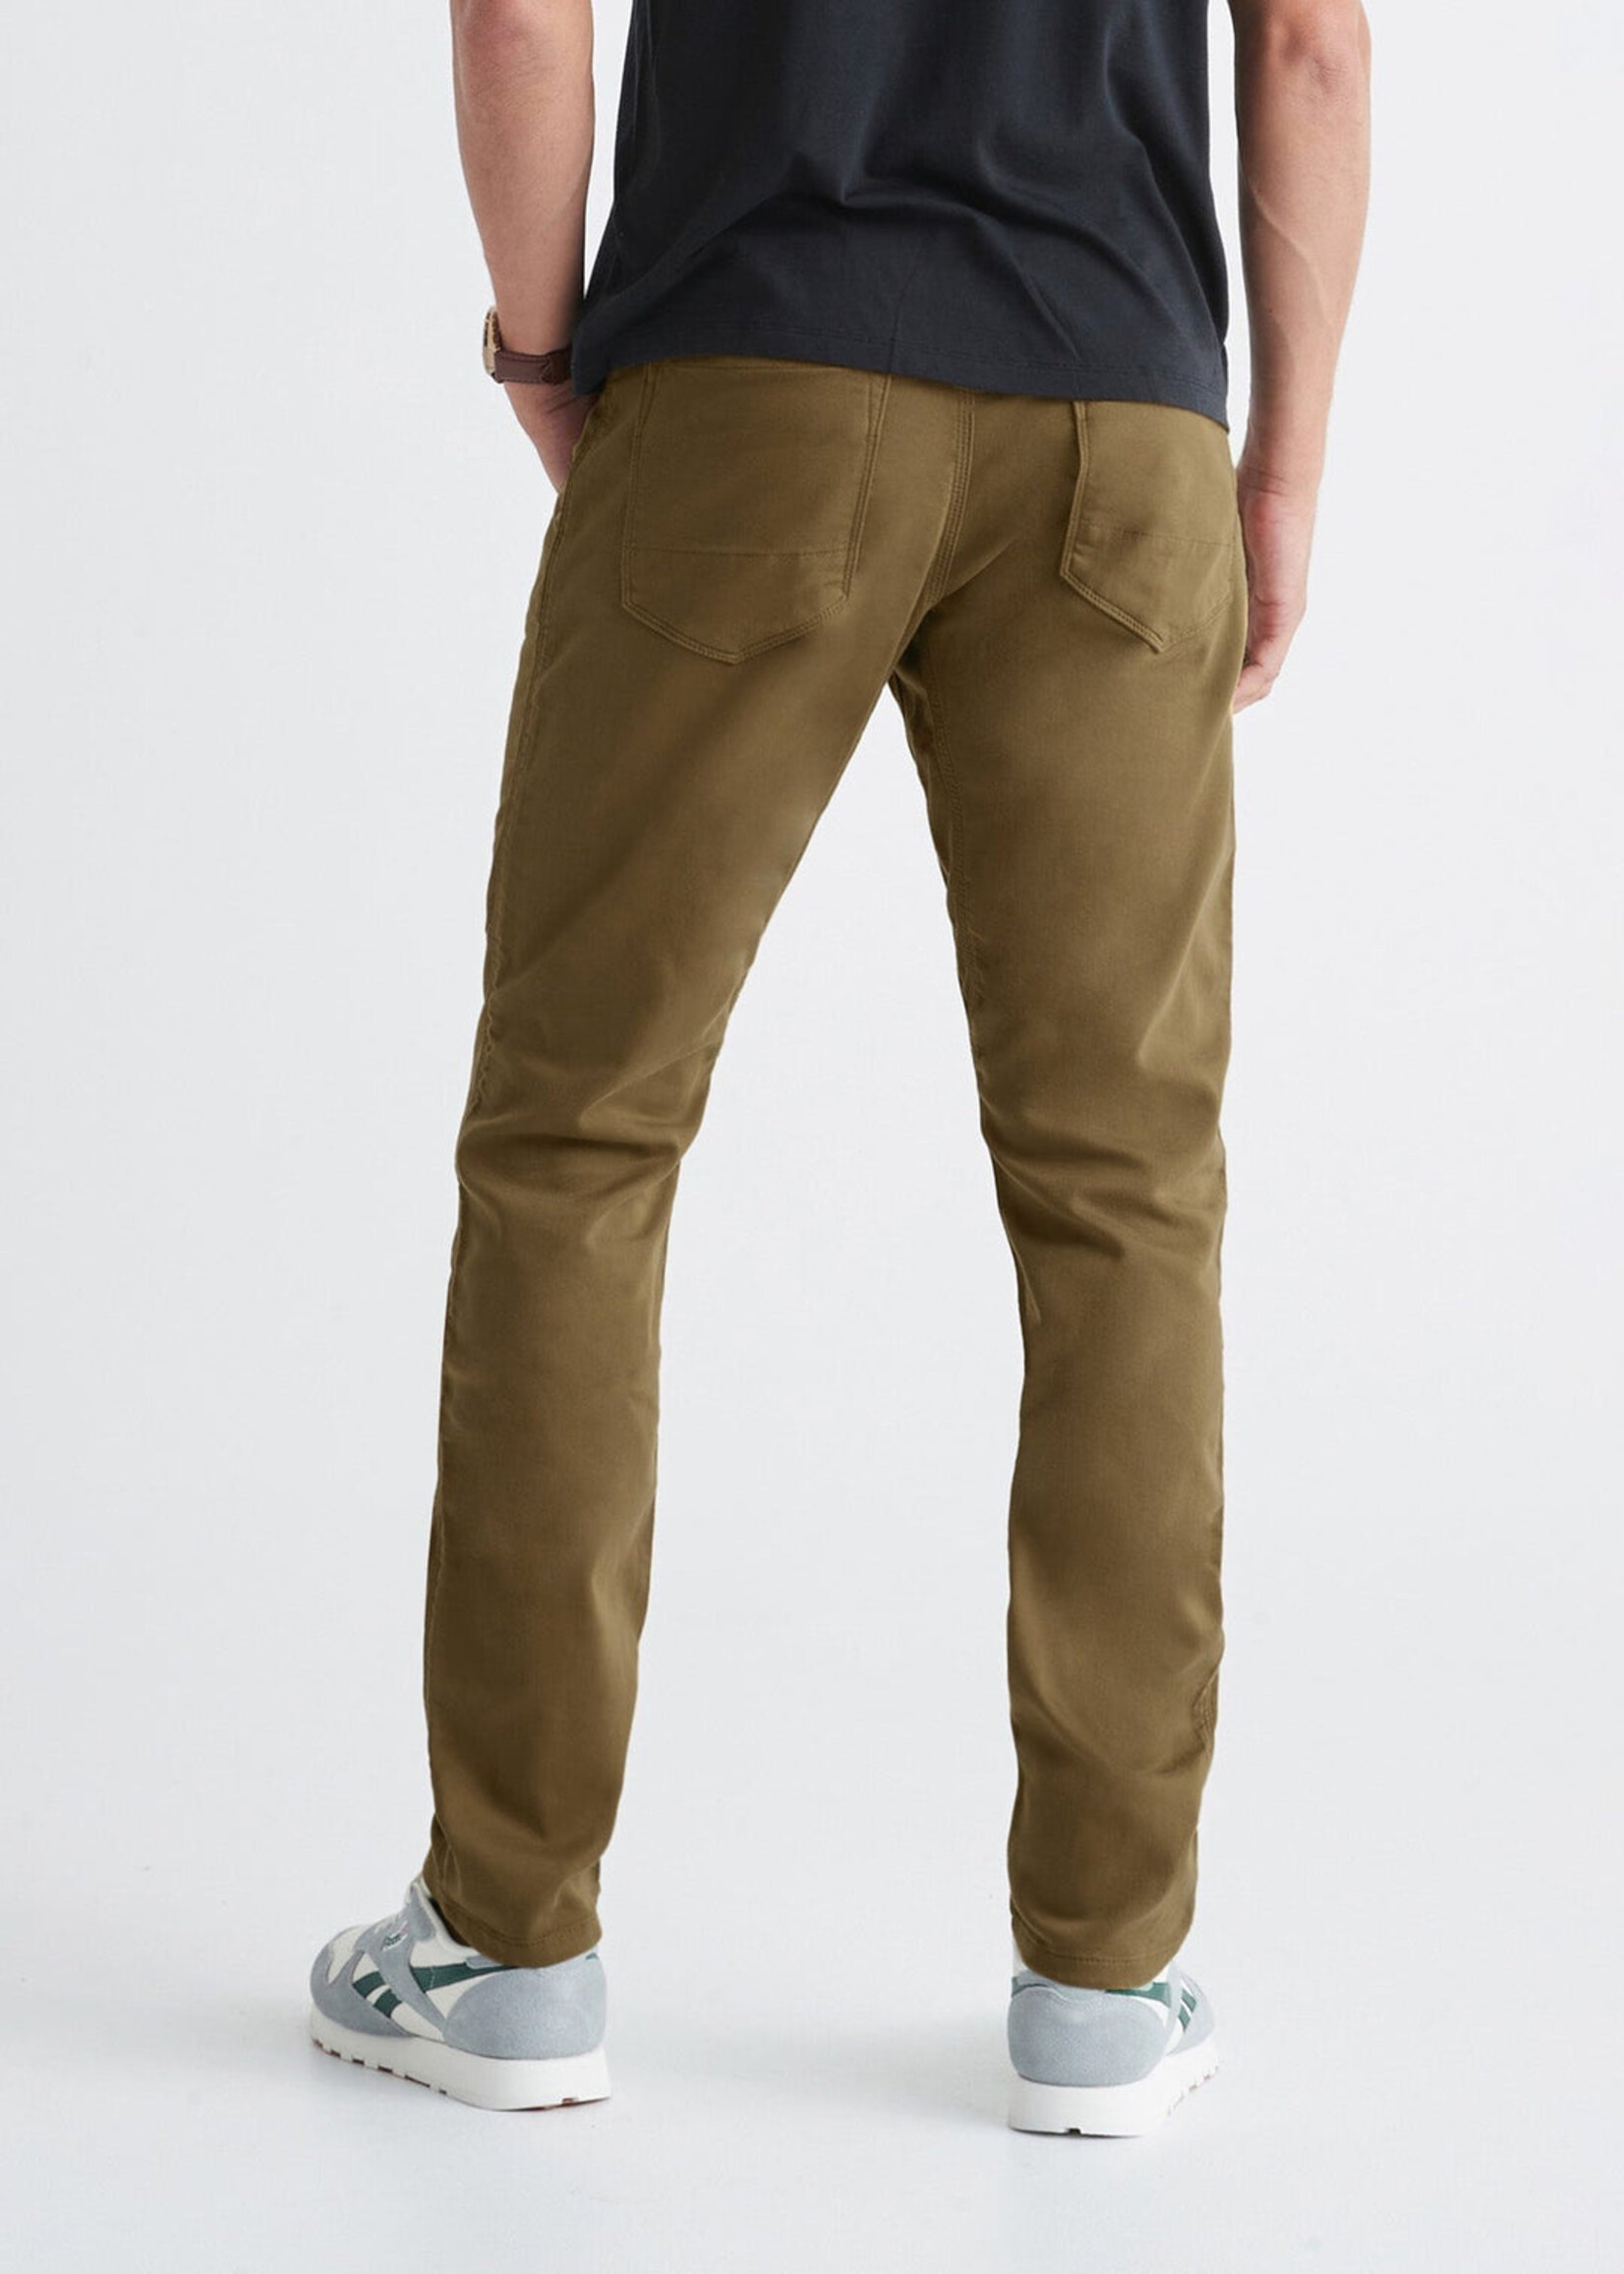 DUER No Sweat Pant Relaxed Taper - Tobacco